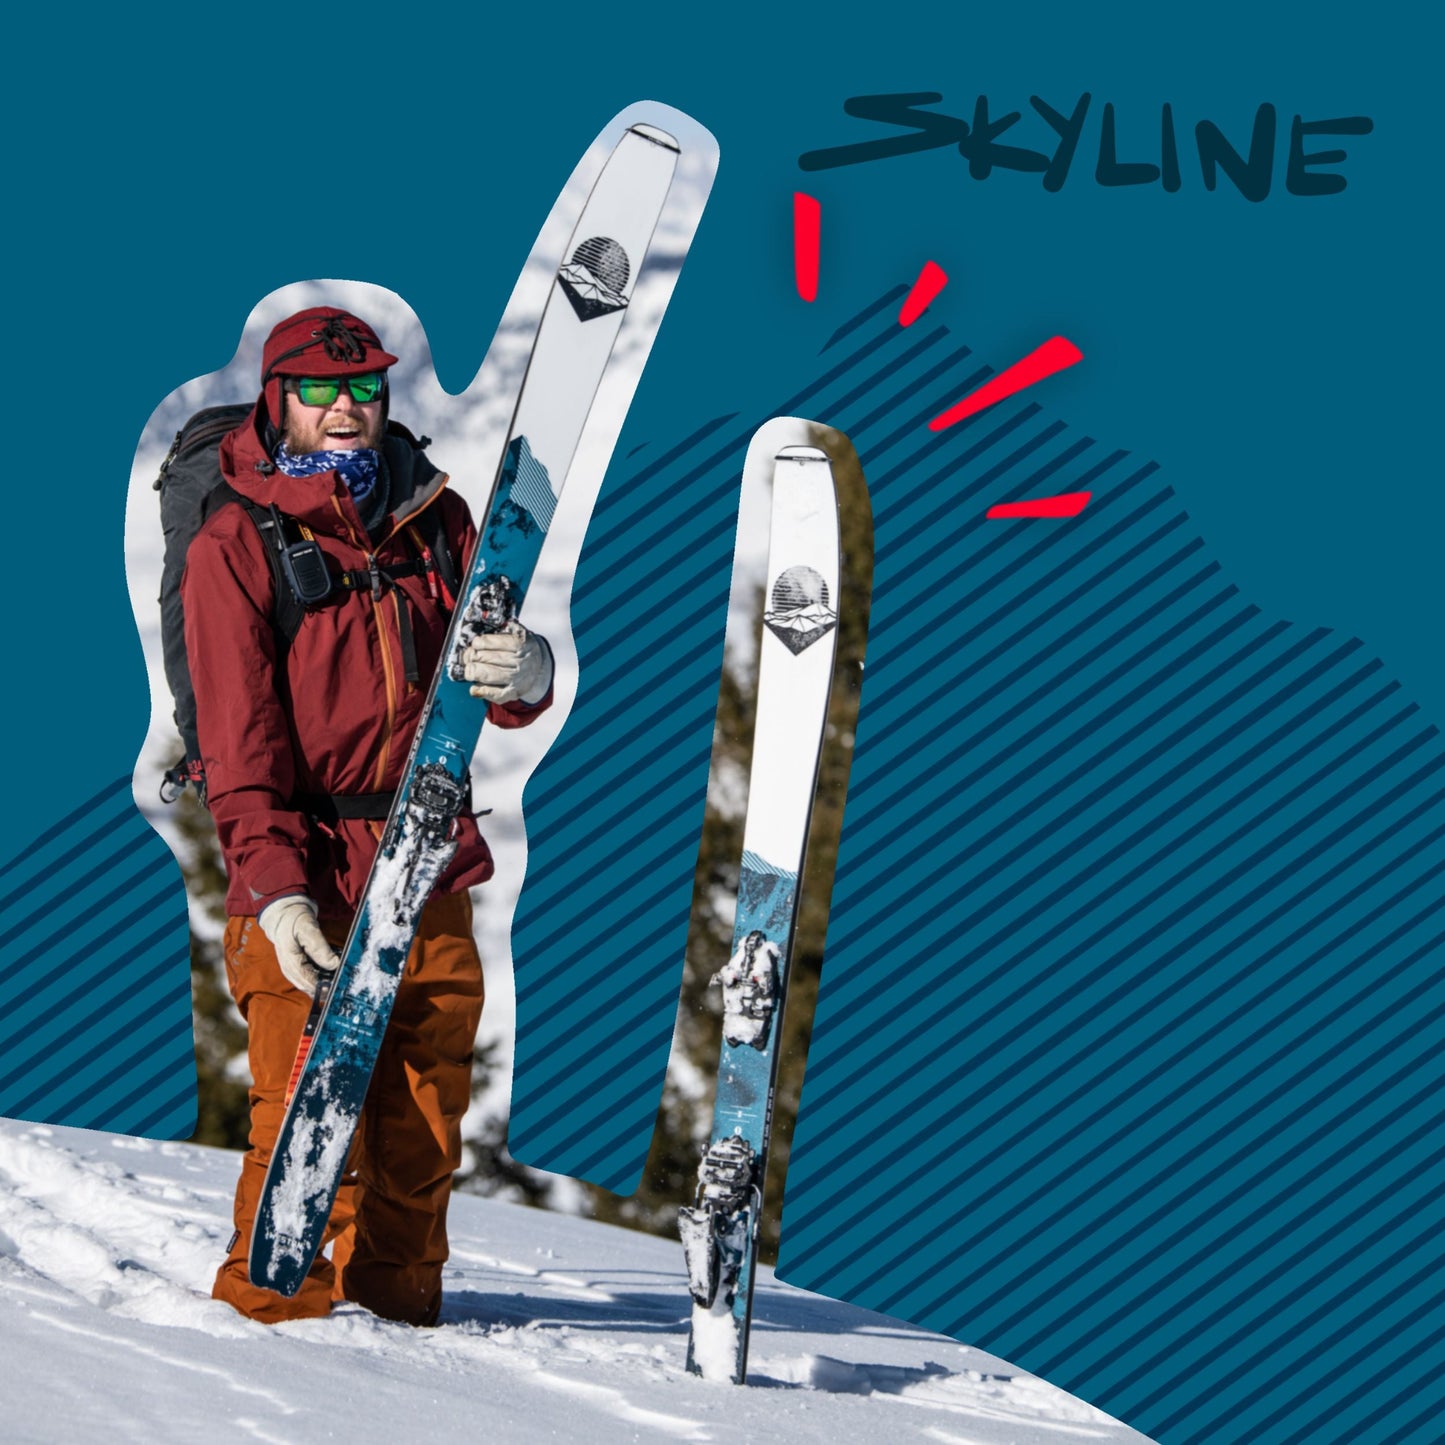 Skyline Carbon Skis with Touring Bindings (Skins Included) Demo